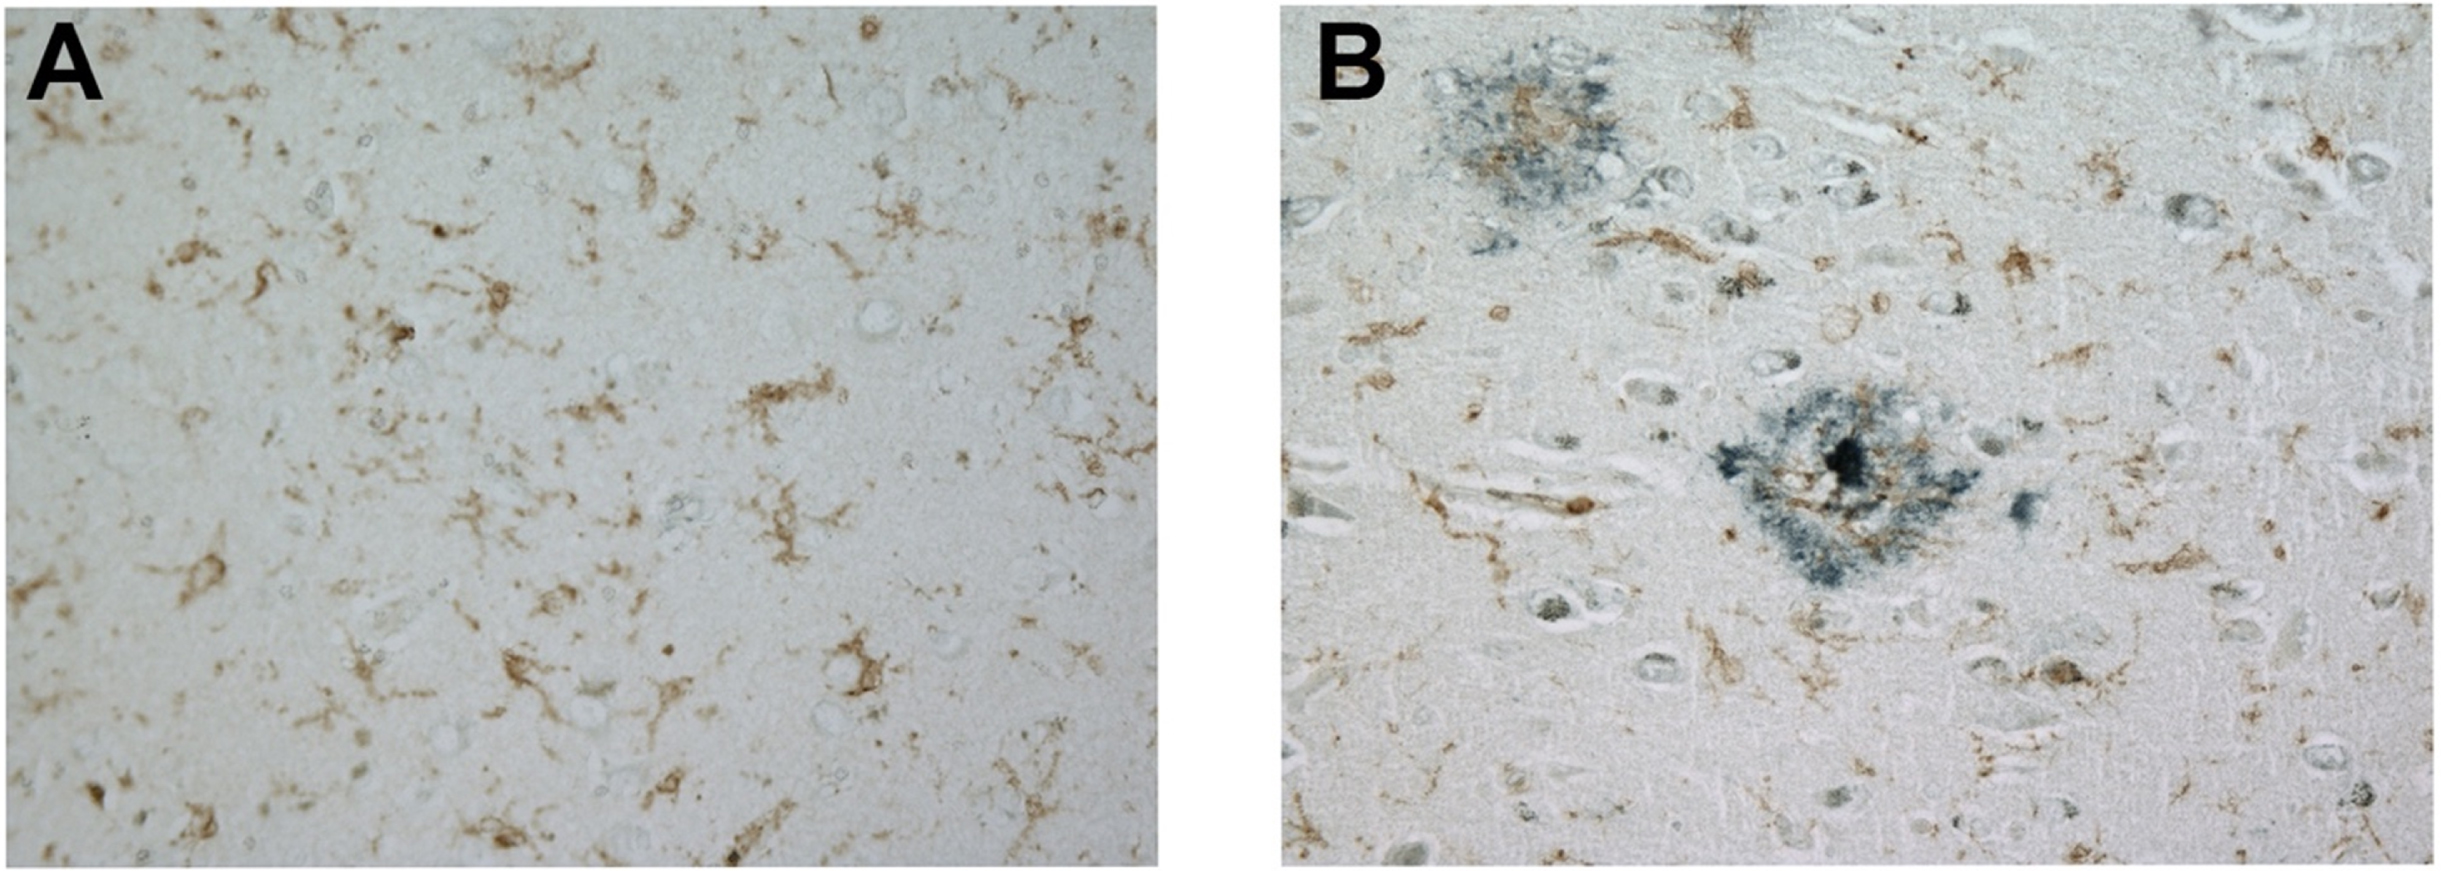 FcRγ is expressed robustly in a non-AD brain in the absence of amyloid plaques (A) and in an AD brain in the presence of amyloid plaques (B). These representative images were obtained with a 40× objective. Brown label represents FcRγ staining while blue-black label represents amyloid-beta staining.